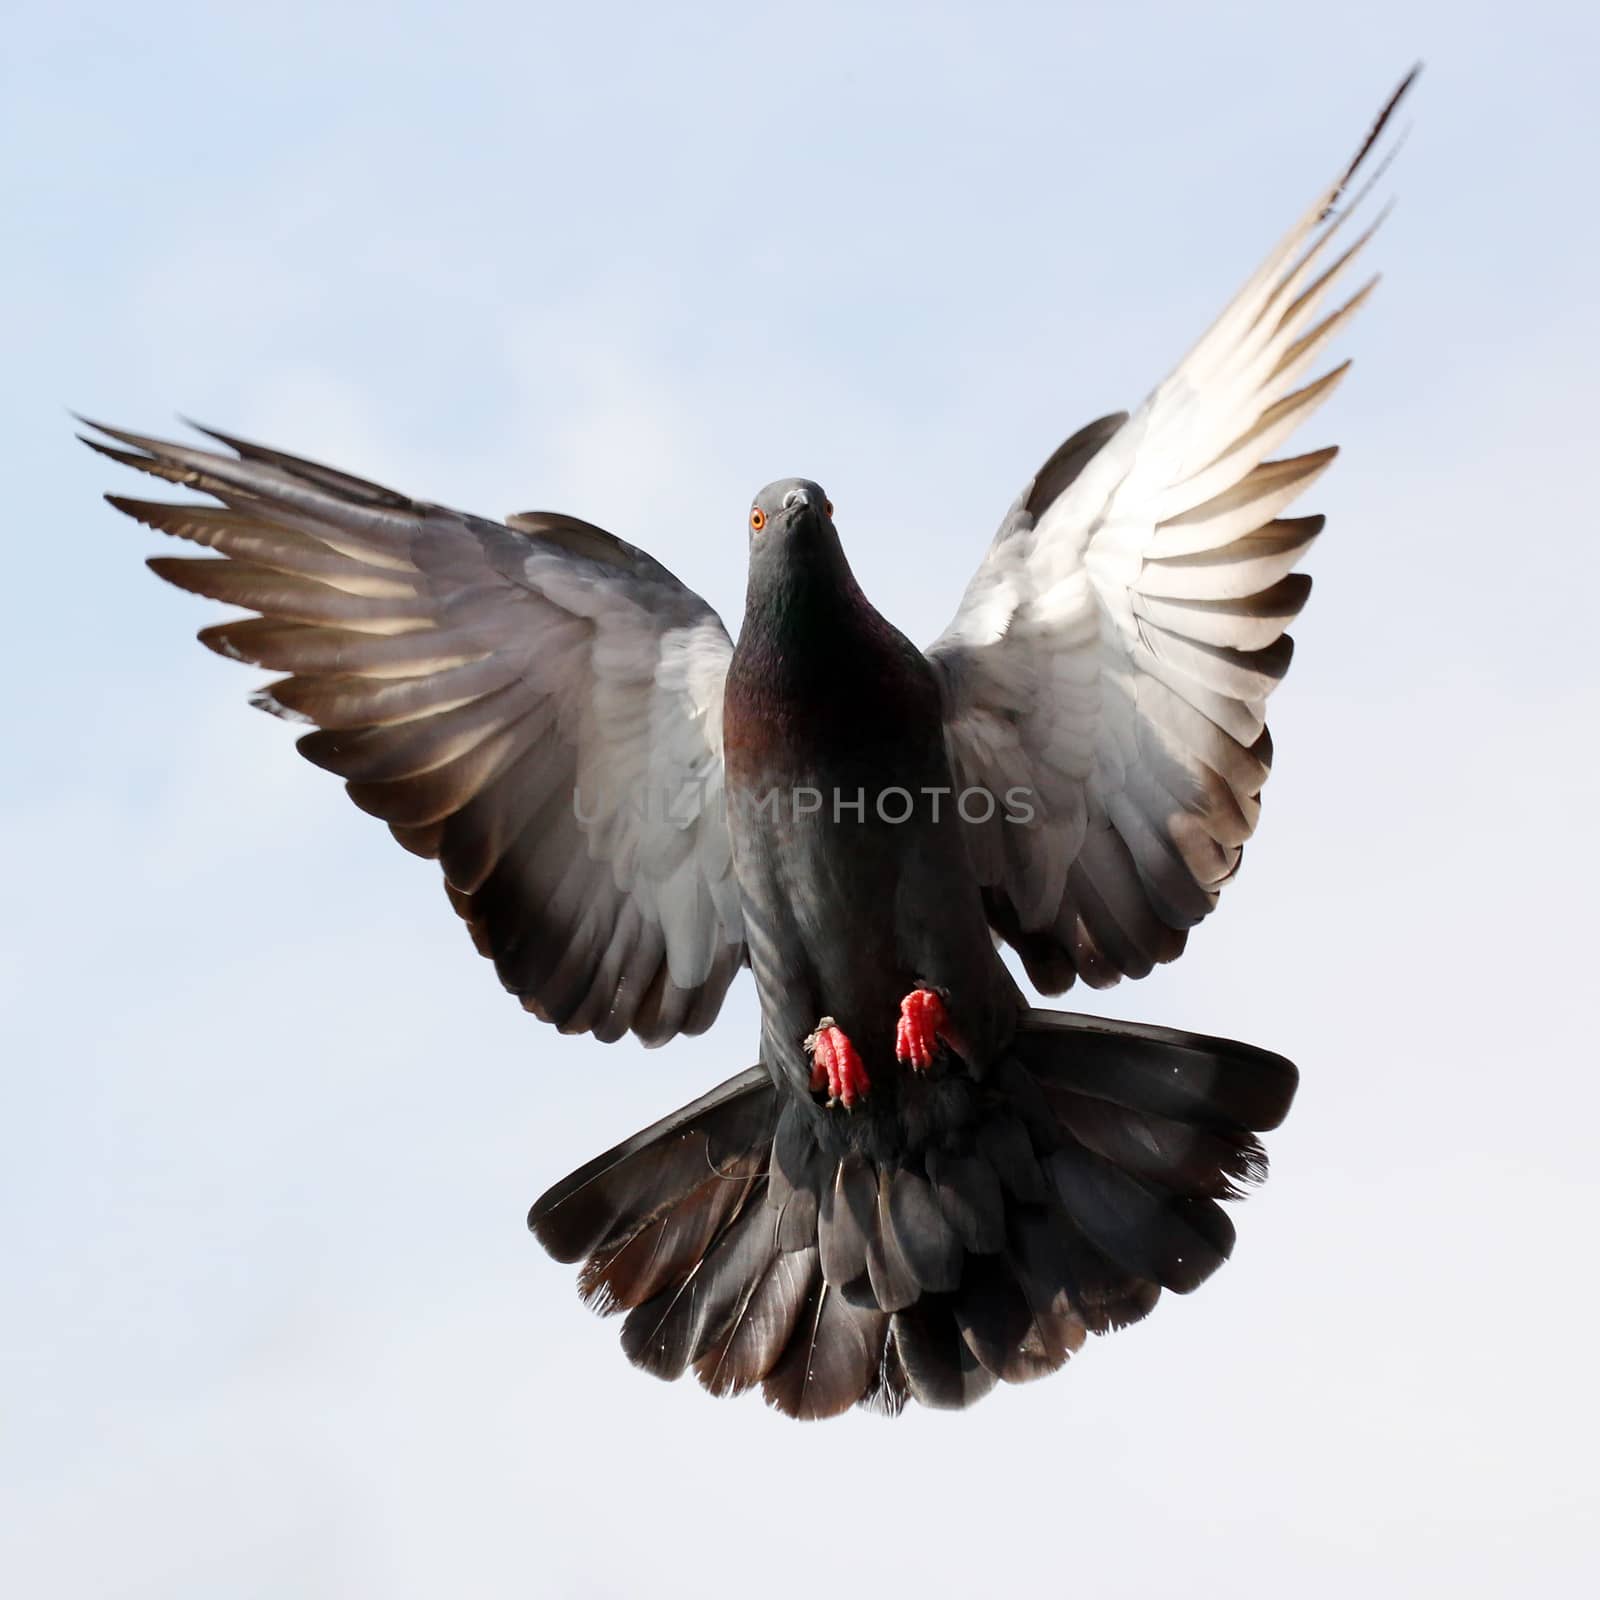 Flying pigeon against the beautiful sky